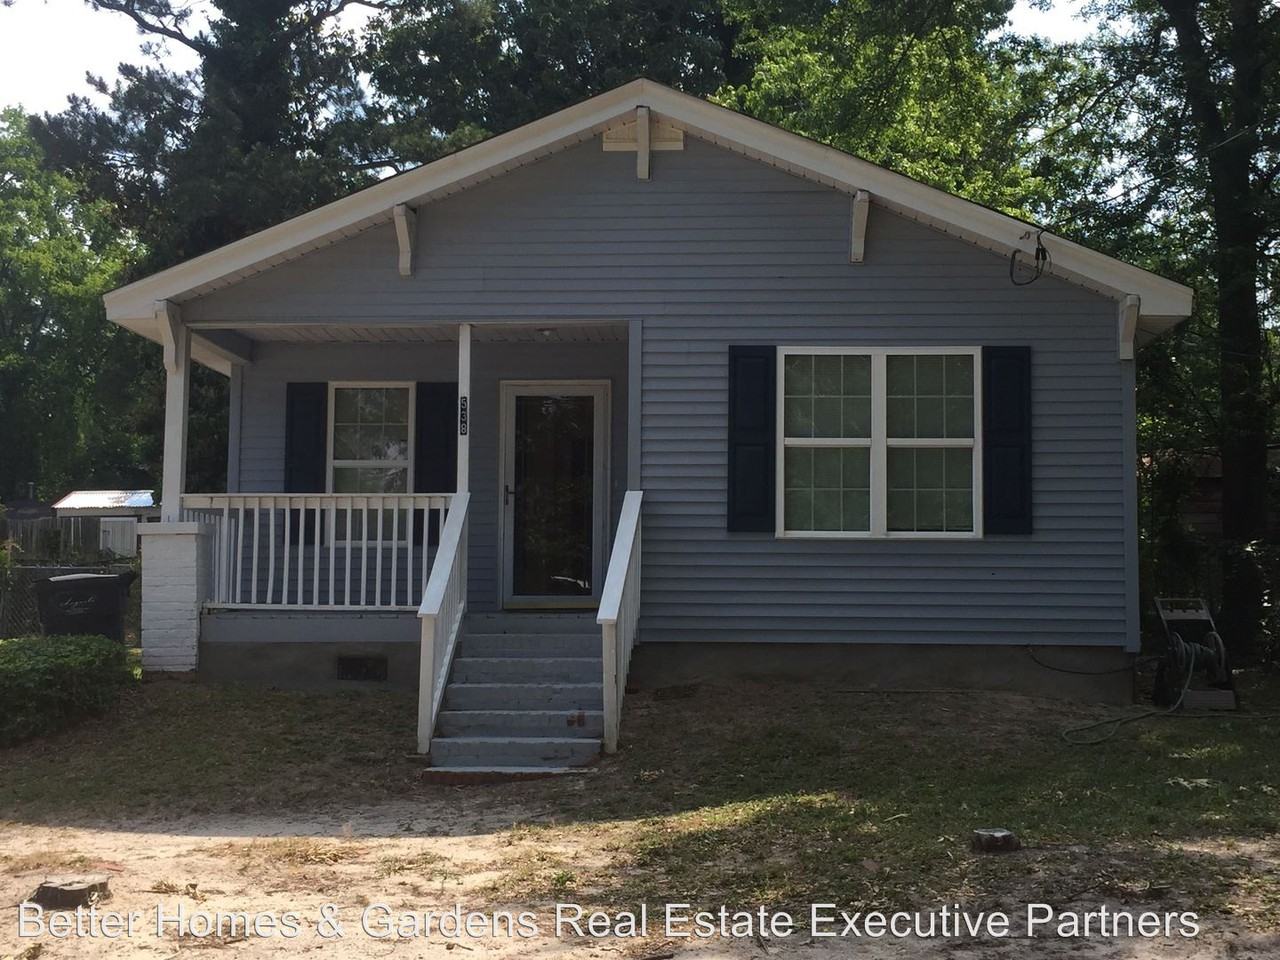 2575 Henry St Augusta Ga 30904 With Images Renting A House Find Real Estate Real Estate